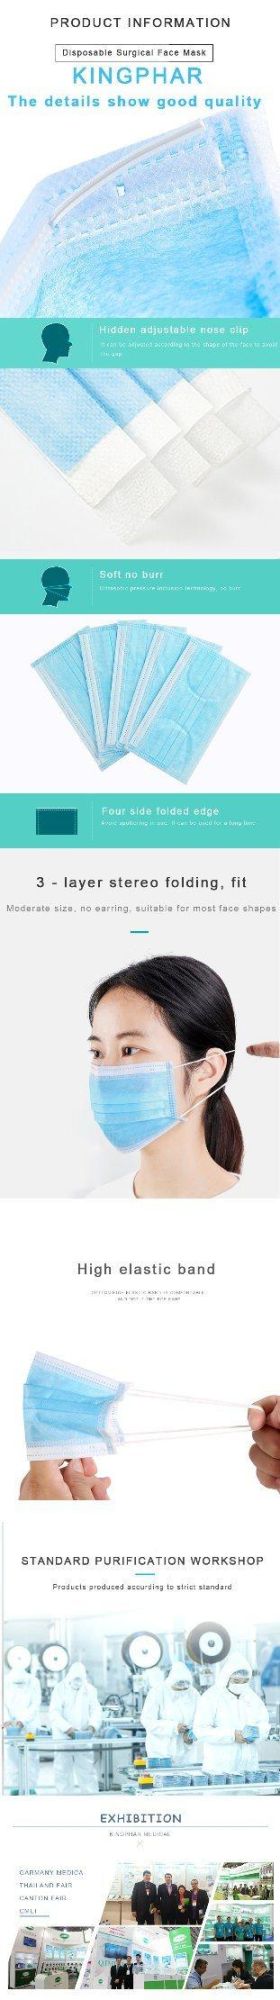 White List Factory Direct Ce En14683 Type 2r Anti Droplets Virus Bacterial 3 Ply Non-Woven Medical Procedure Pleated Earloop Disposable Surgical Face Mask